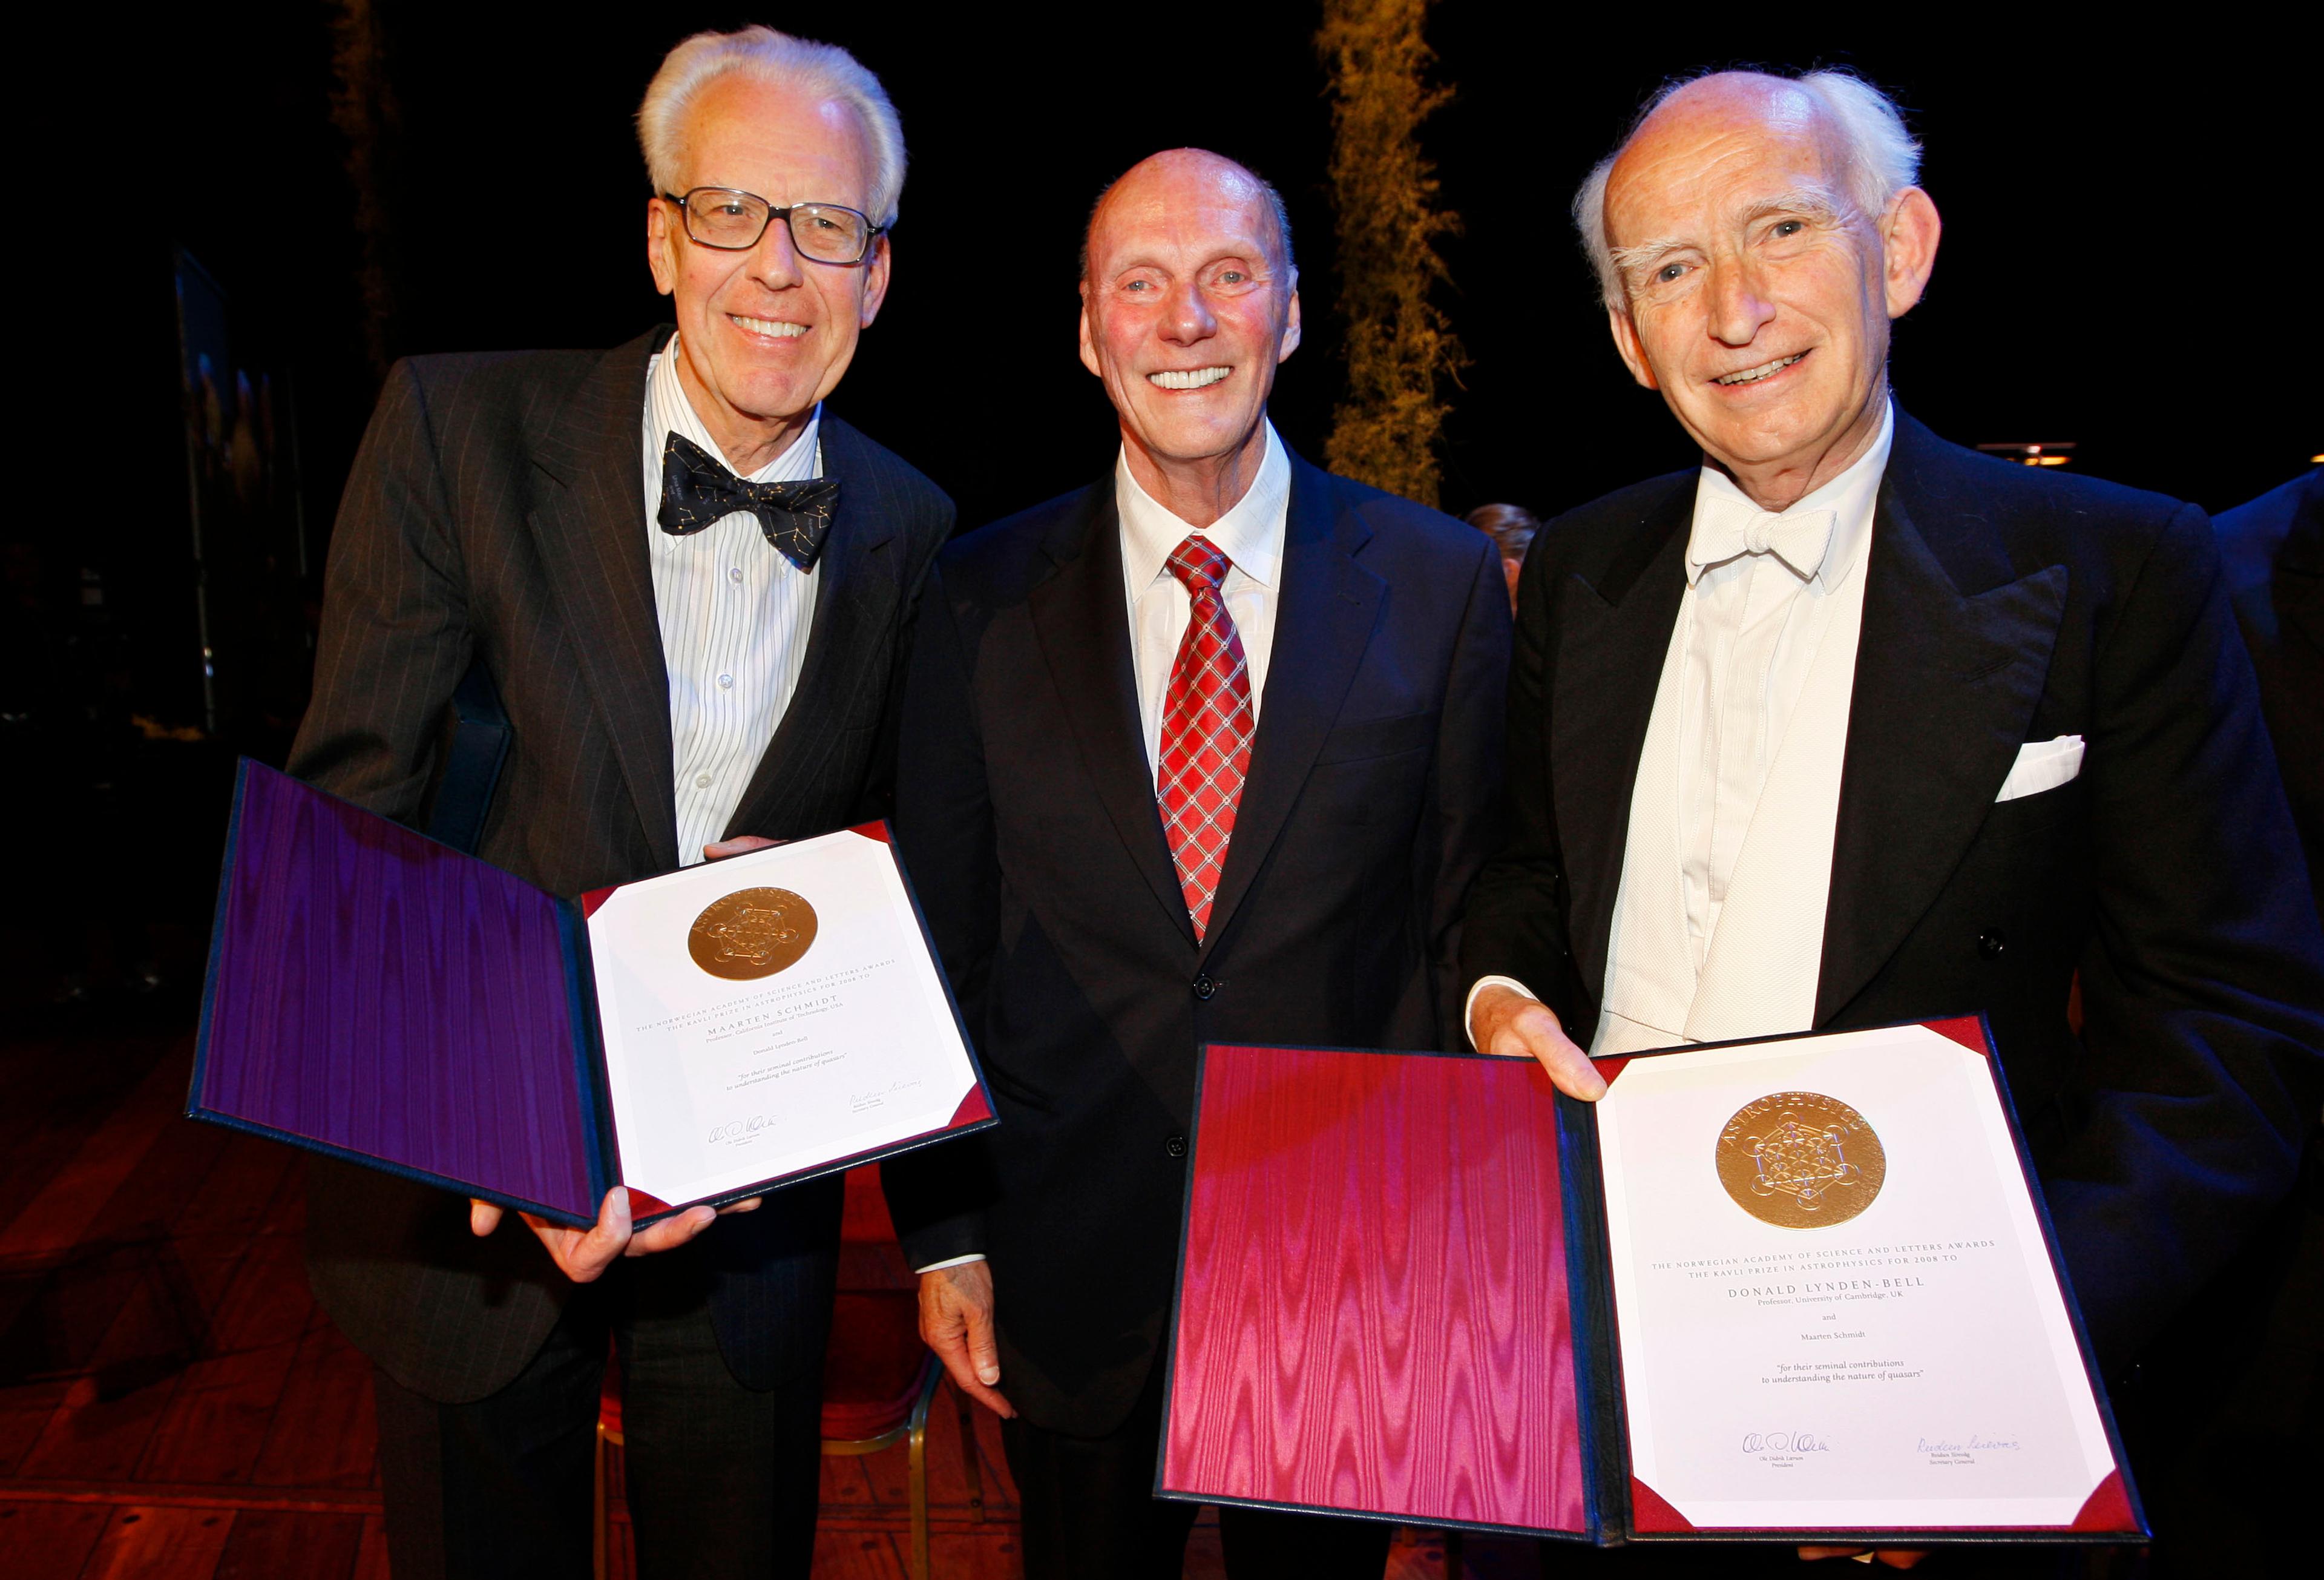 The 2008 Kavli Prize astrophysics laureates together with Fred Kavli.